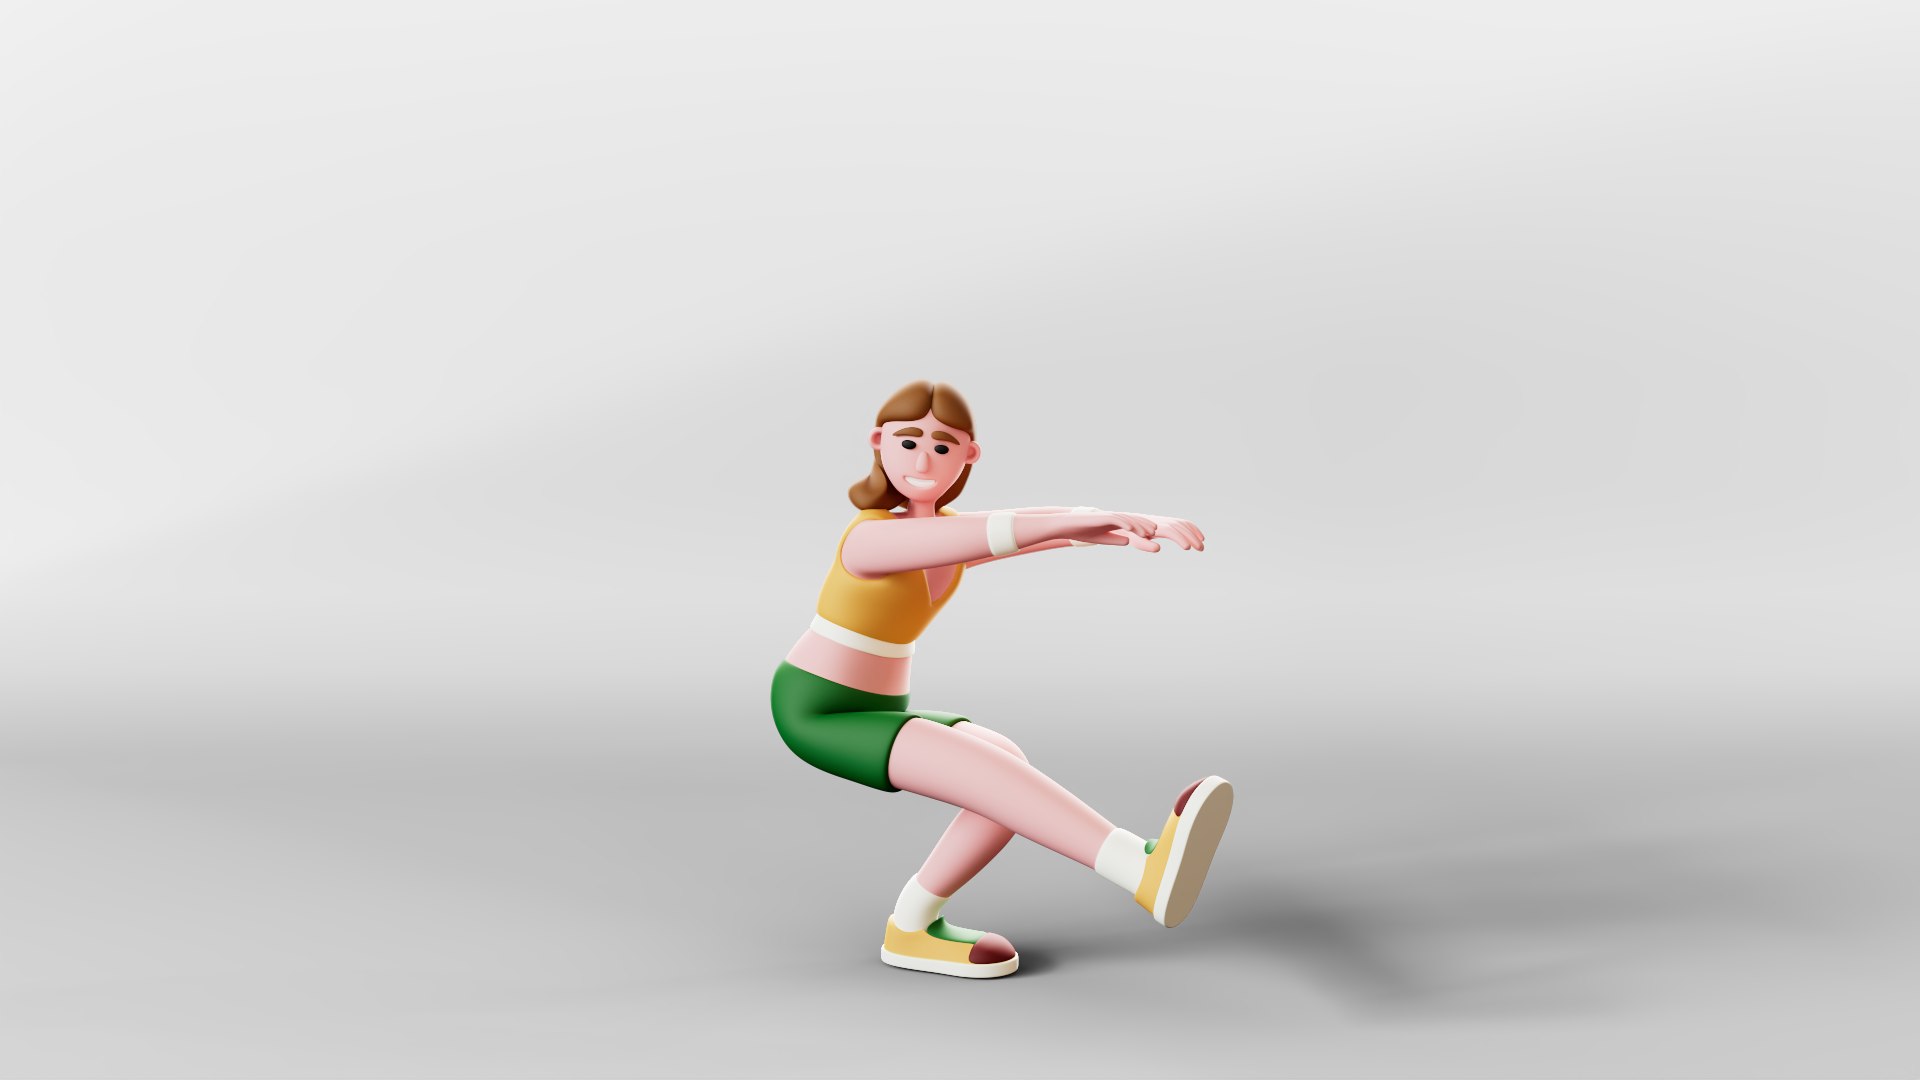 Sportsmen - Rigged 3D Characters 12 Animations 3D Model - TurboSquid ...